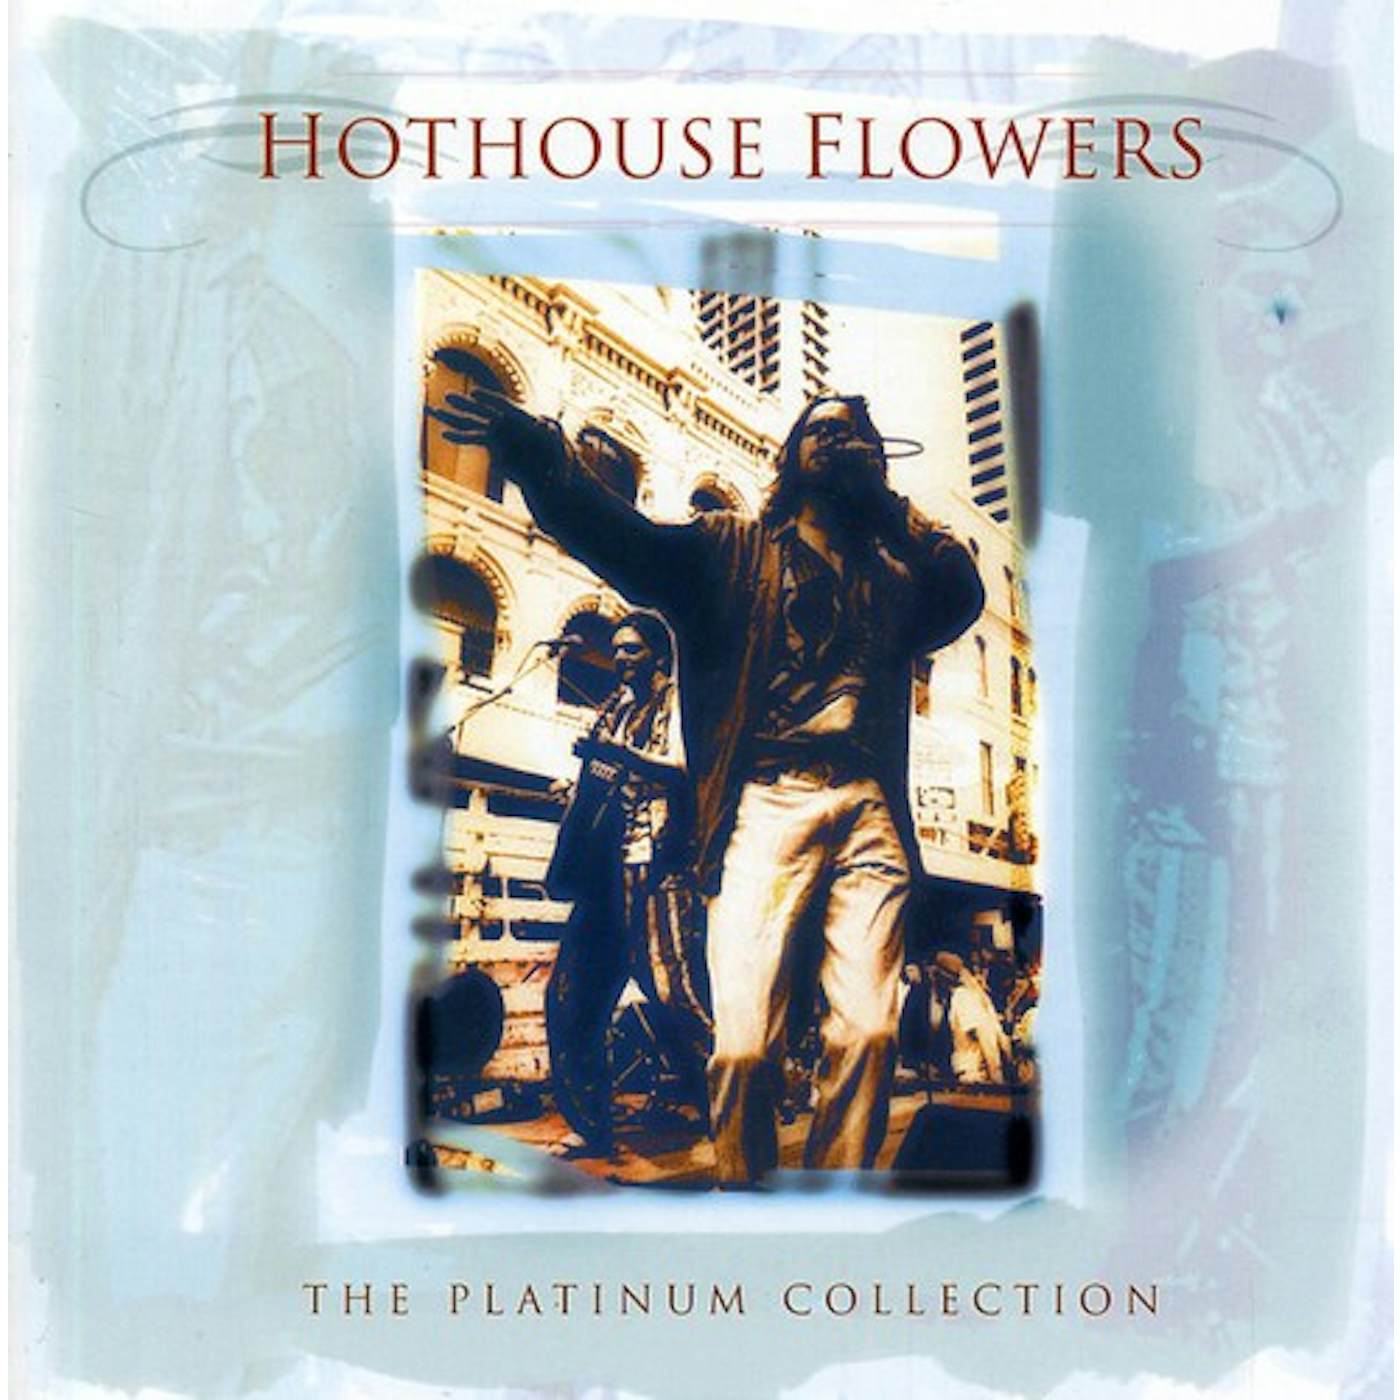 Hothouse Flowers PLATINUM COLLECTION CD